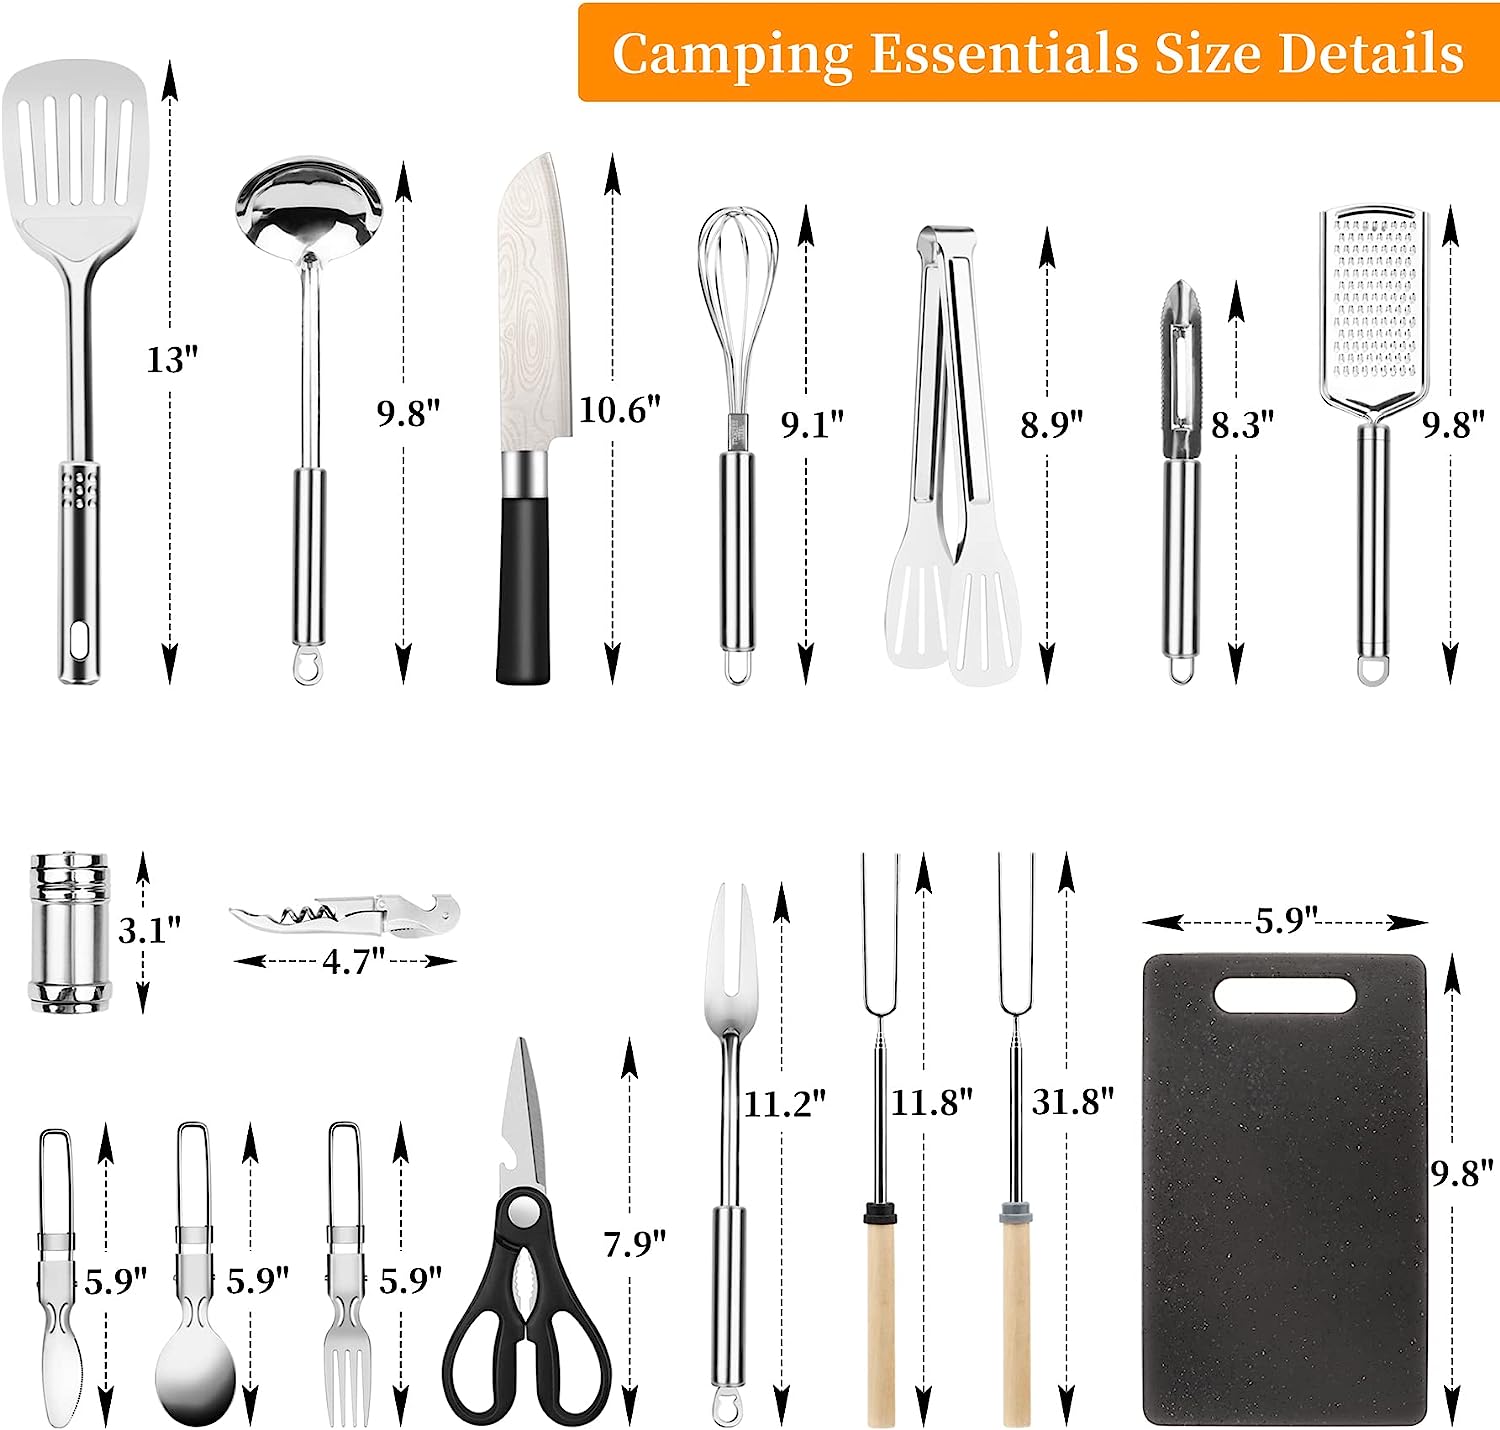 BeryLove Camping Cooking Utensils Set Camping BBQ Cookware Stainless Steel  Grill Tools Gear and Equipment for Travel Tenting Kitchen Essentials